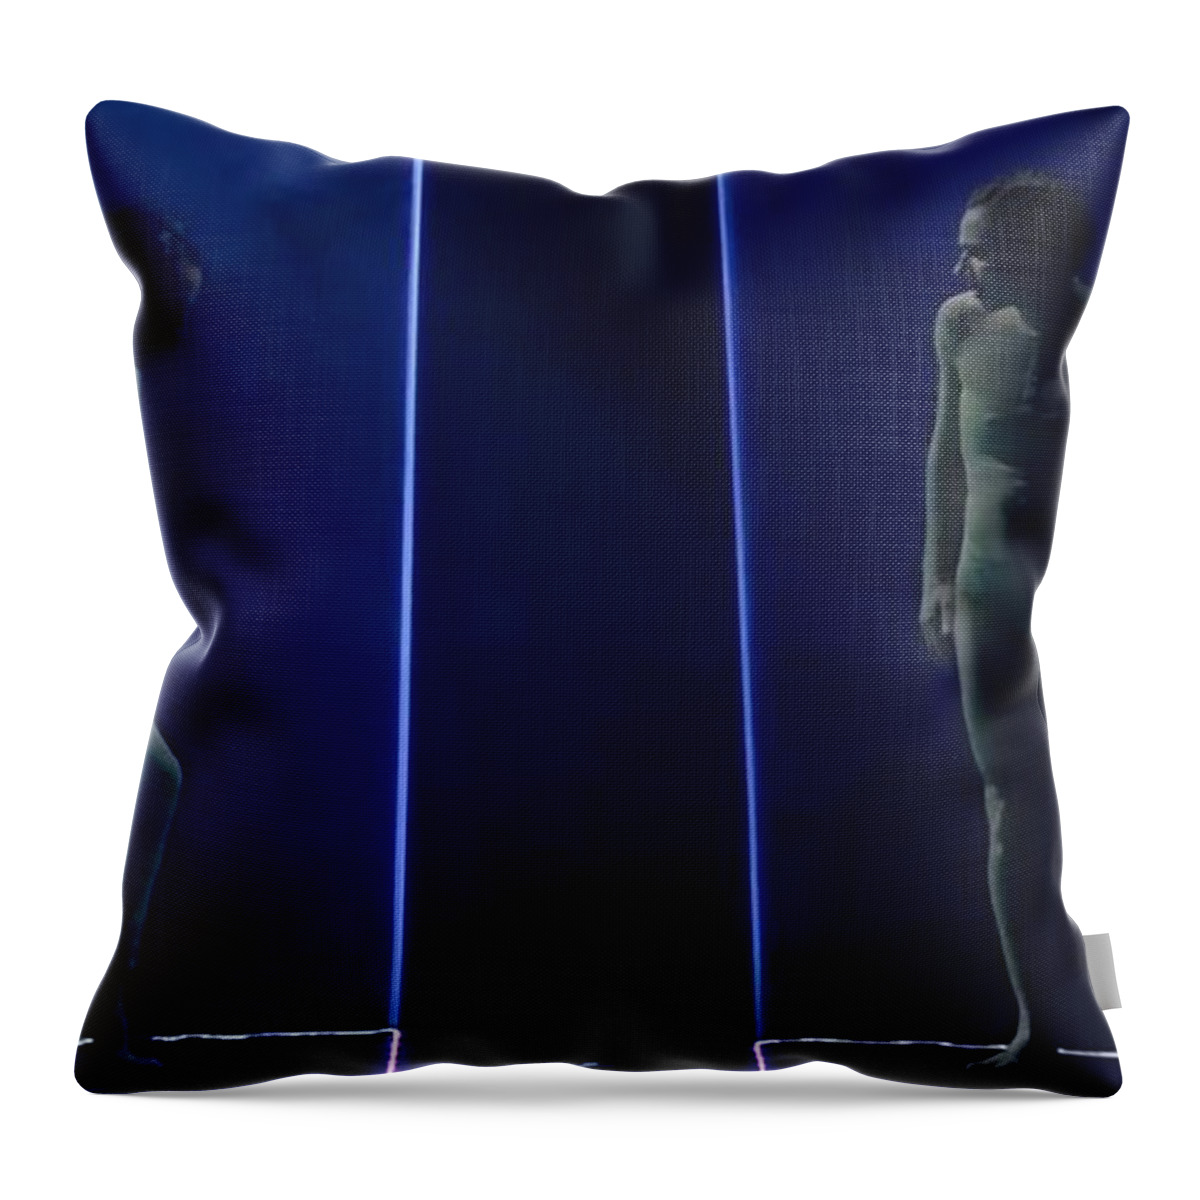 Pietà Throw Pillow featuring the photograph Icons by Matteo TOTARO